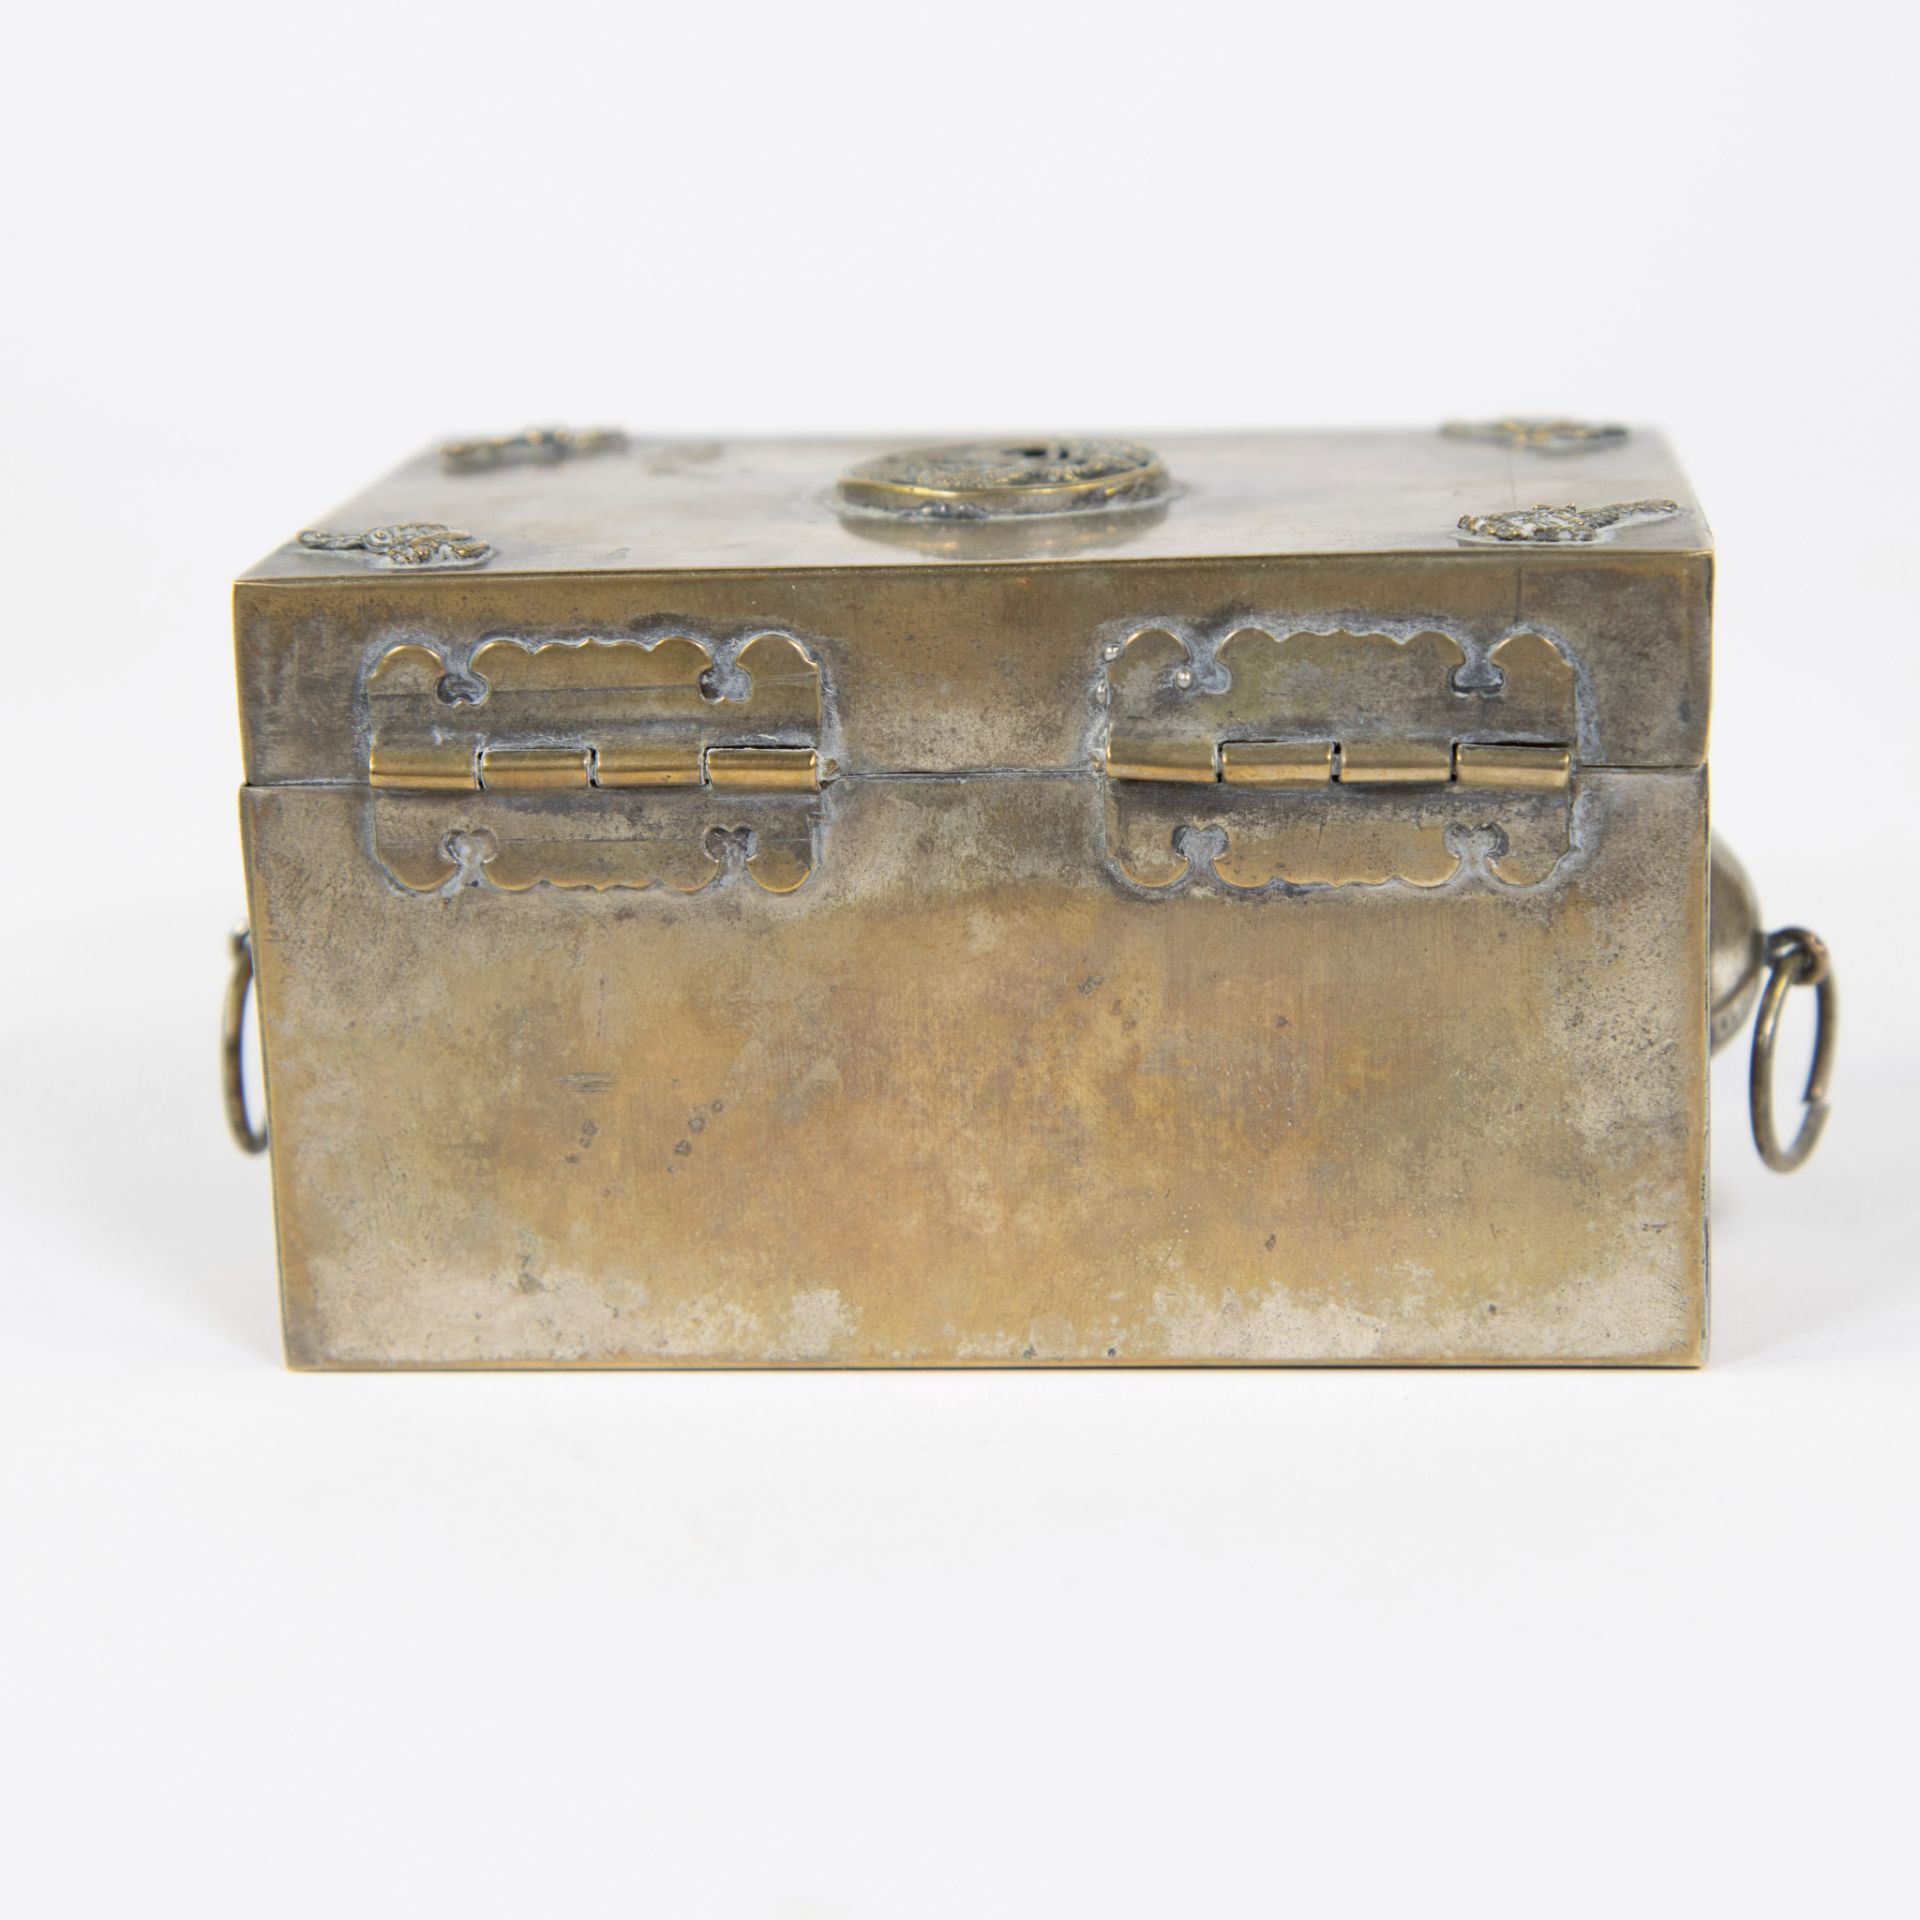 Chinese silver jewelry box - Image 3 of 6